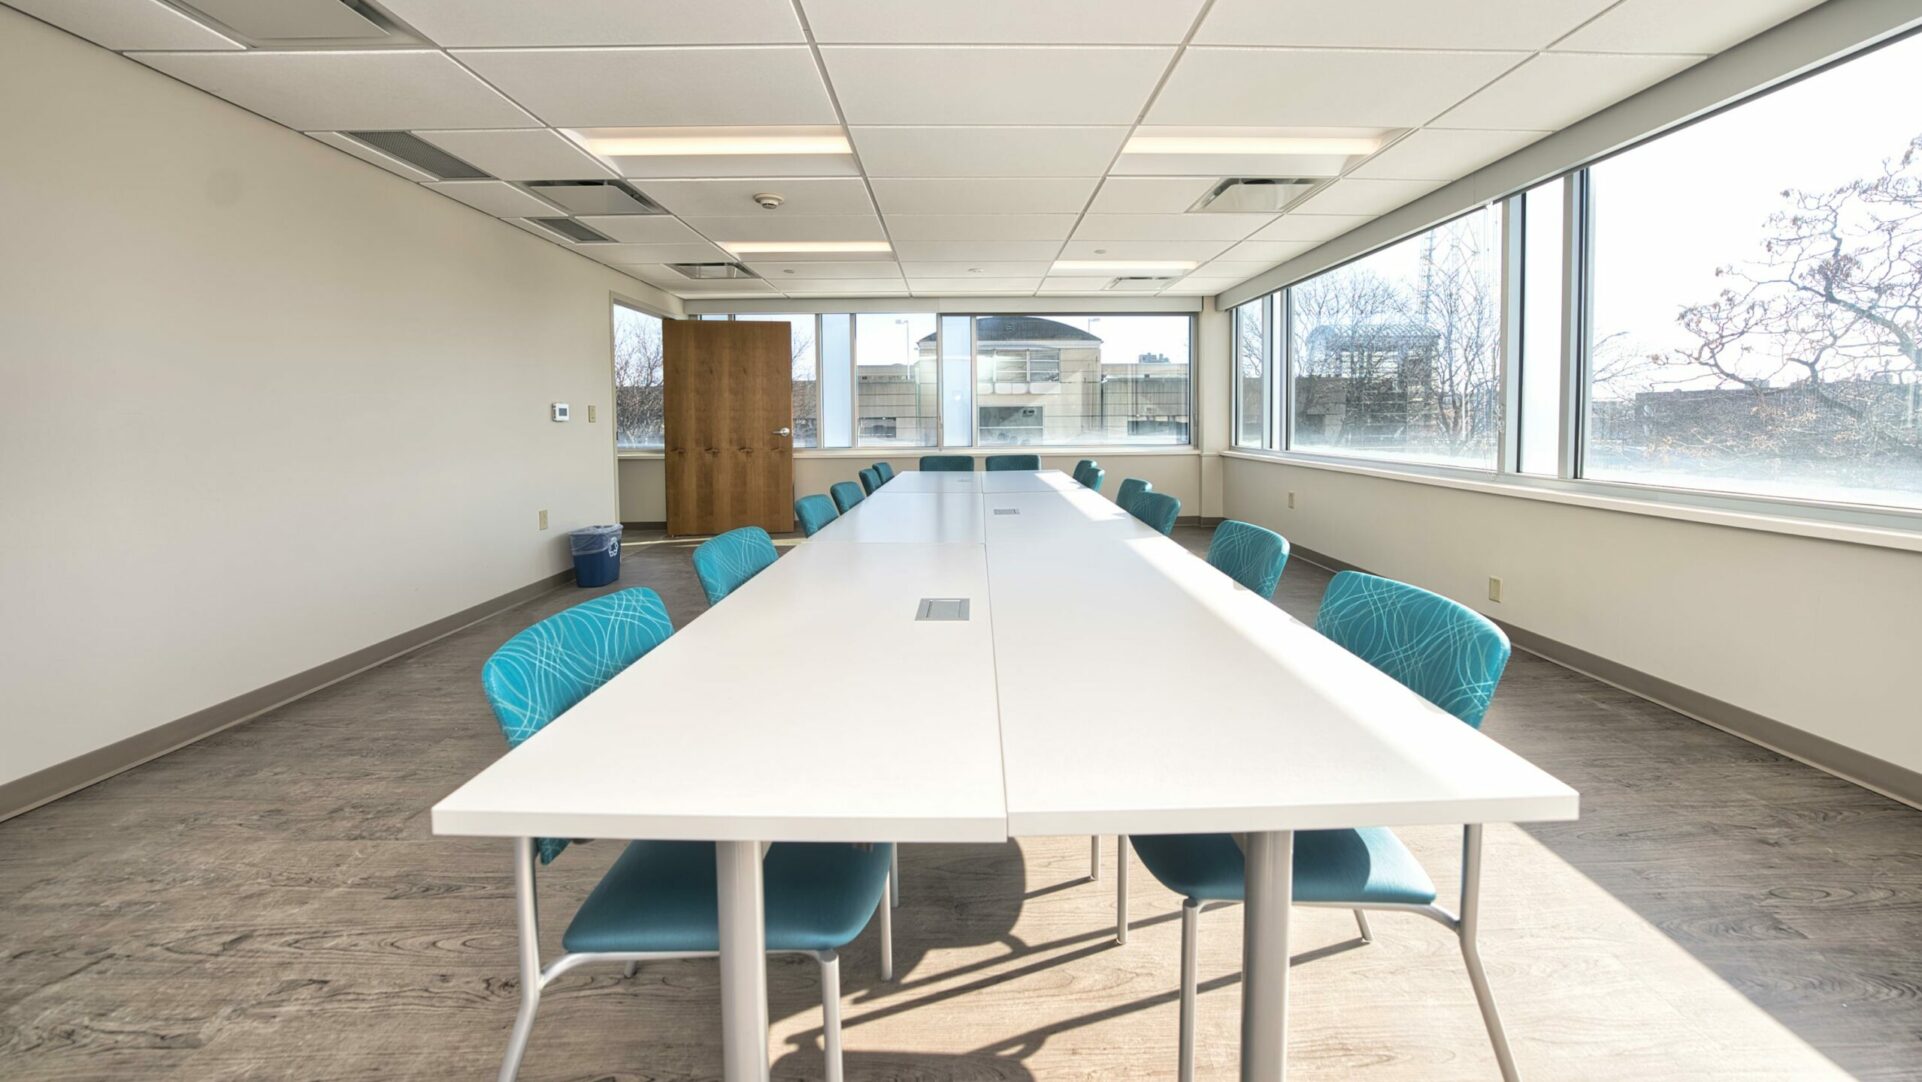 Interior shot of a meeting room in the Sandra Eskenazi Mental Health Center.